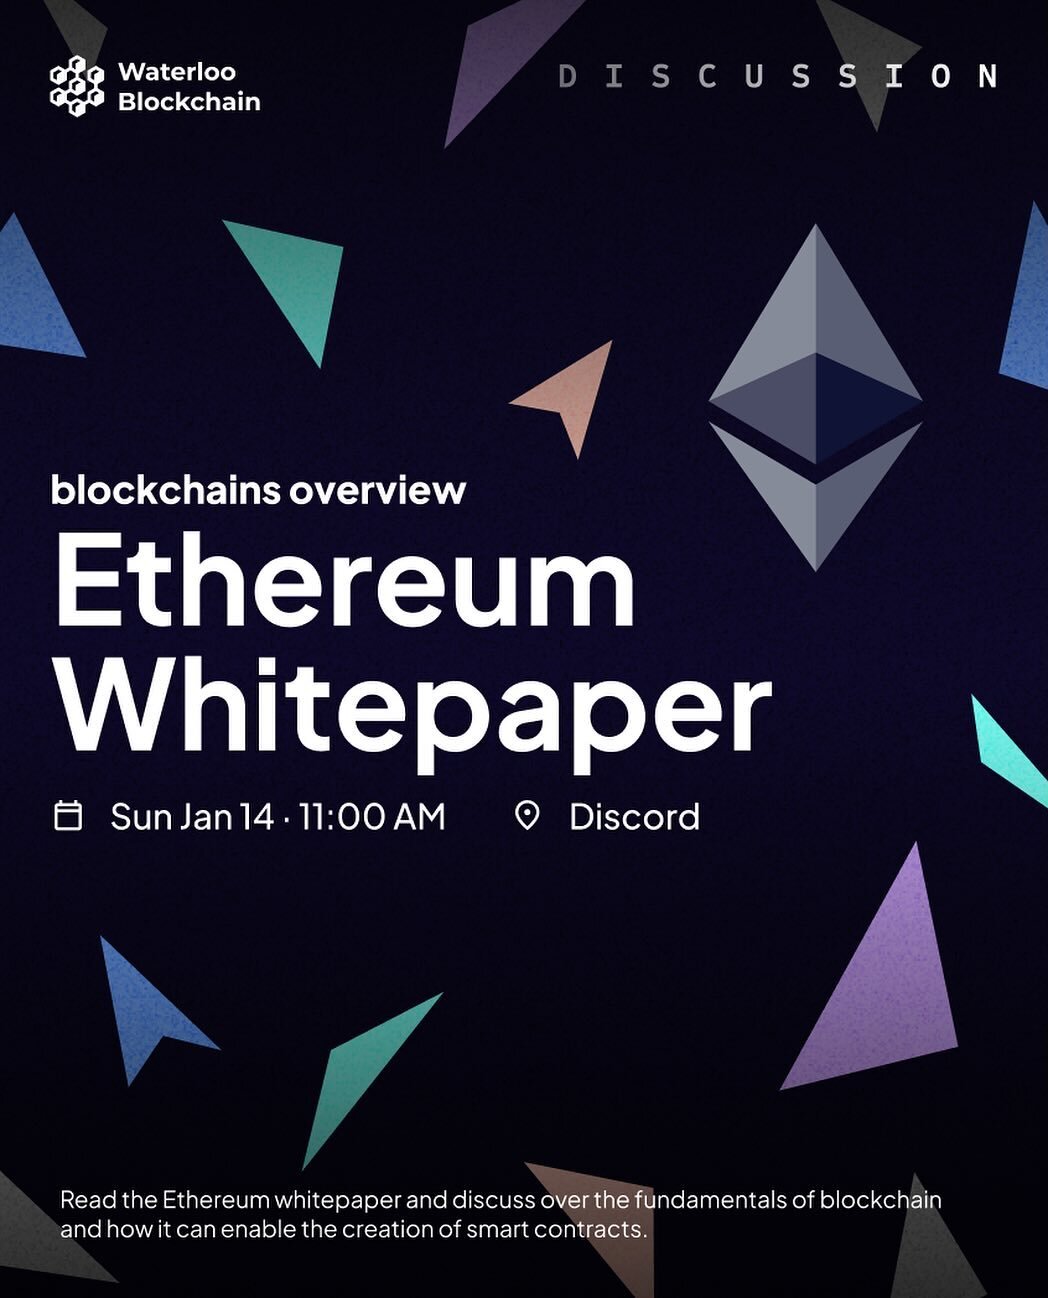 Come learn about the Ethereum Whitepaper this Sunday 11AM!

To prepare yourself for our research discussion circles, here&rsquo;s 3 things to do prior to the session:

1. Read the Ethereum whitepaper and come prepared with small list of pros &amp; co